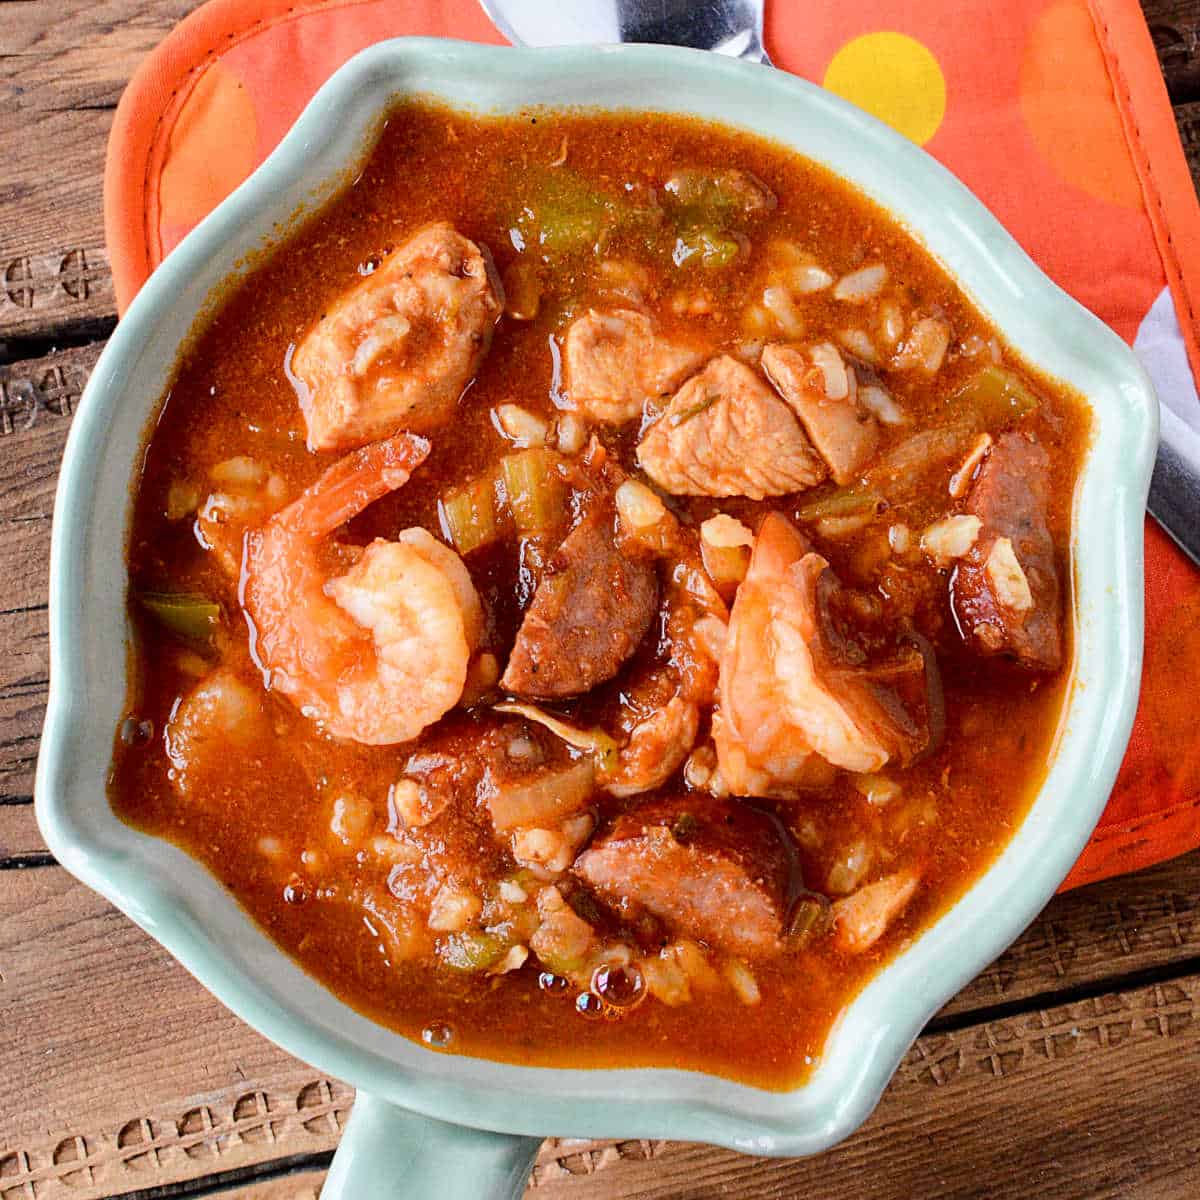 My Chicken Leg and Sausage Gumbo recipe is The Art of Gumbo.